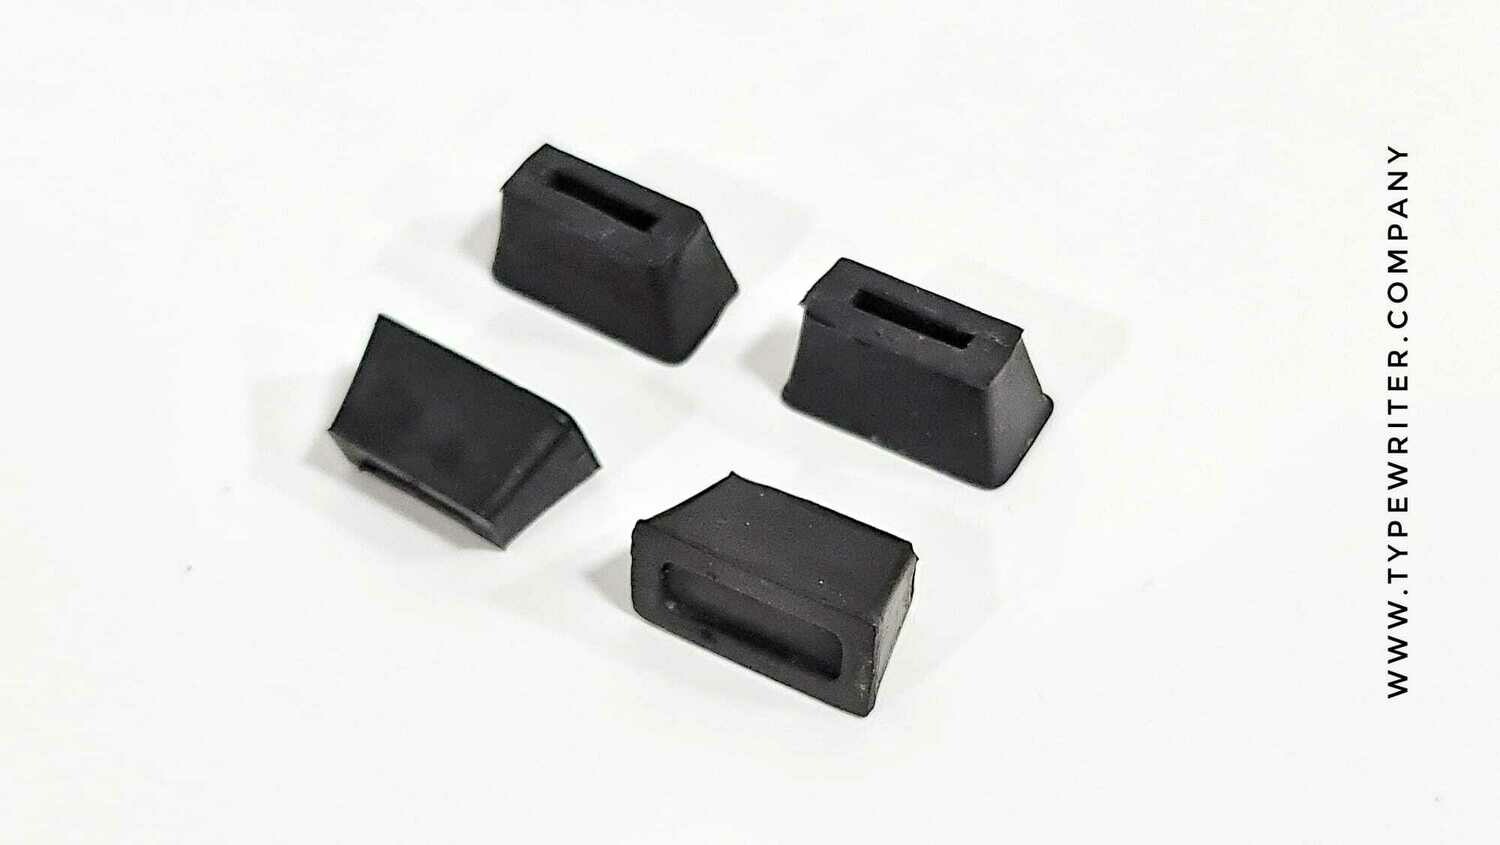 Rubber Replacement feet for Olivetti Lettera 32